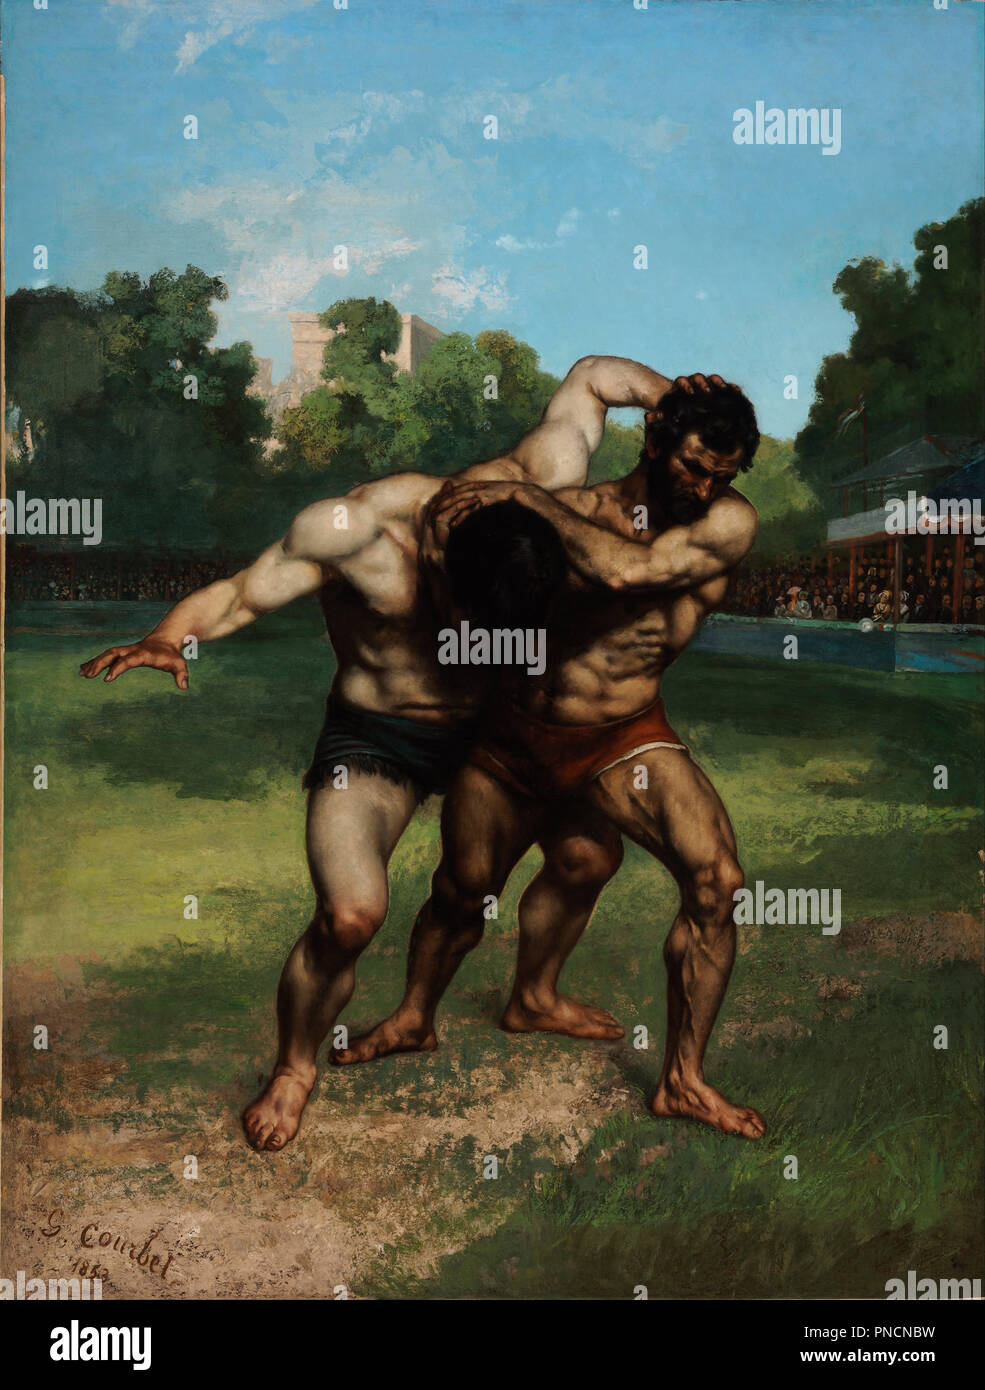 The Wrestlers. Date/Period: 1853. Painting. Oil on canvas. Height: 2,520 mm (99.21 in); Width: 1,980 mm (77.95 in). Author: GUSTAVE COURBET. COURBET, GUSTAVE. Stock Photo